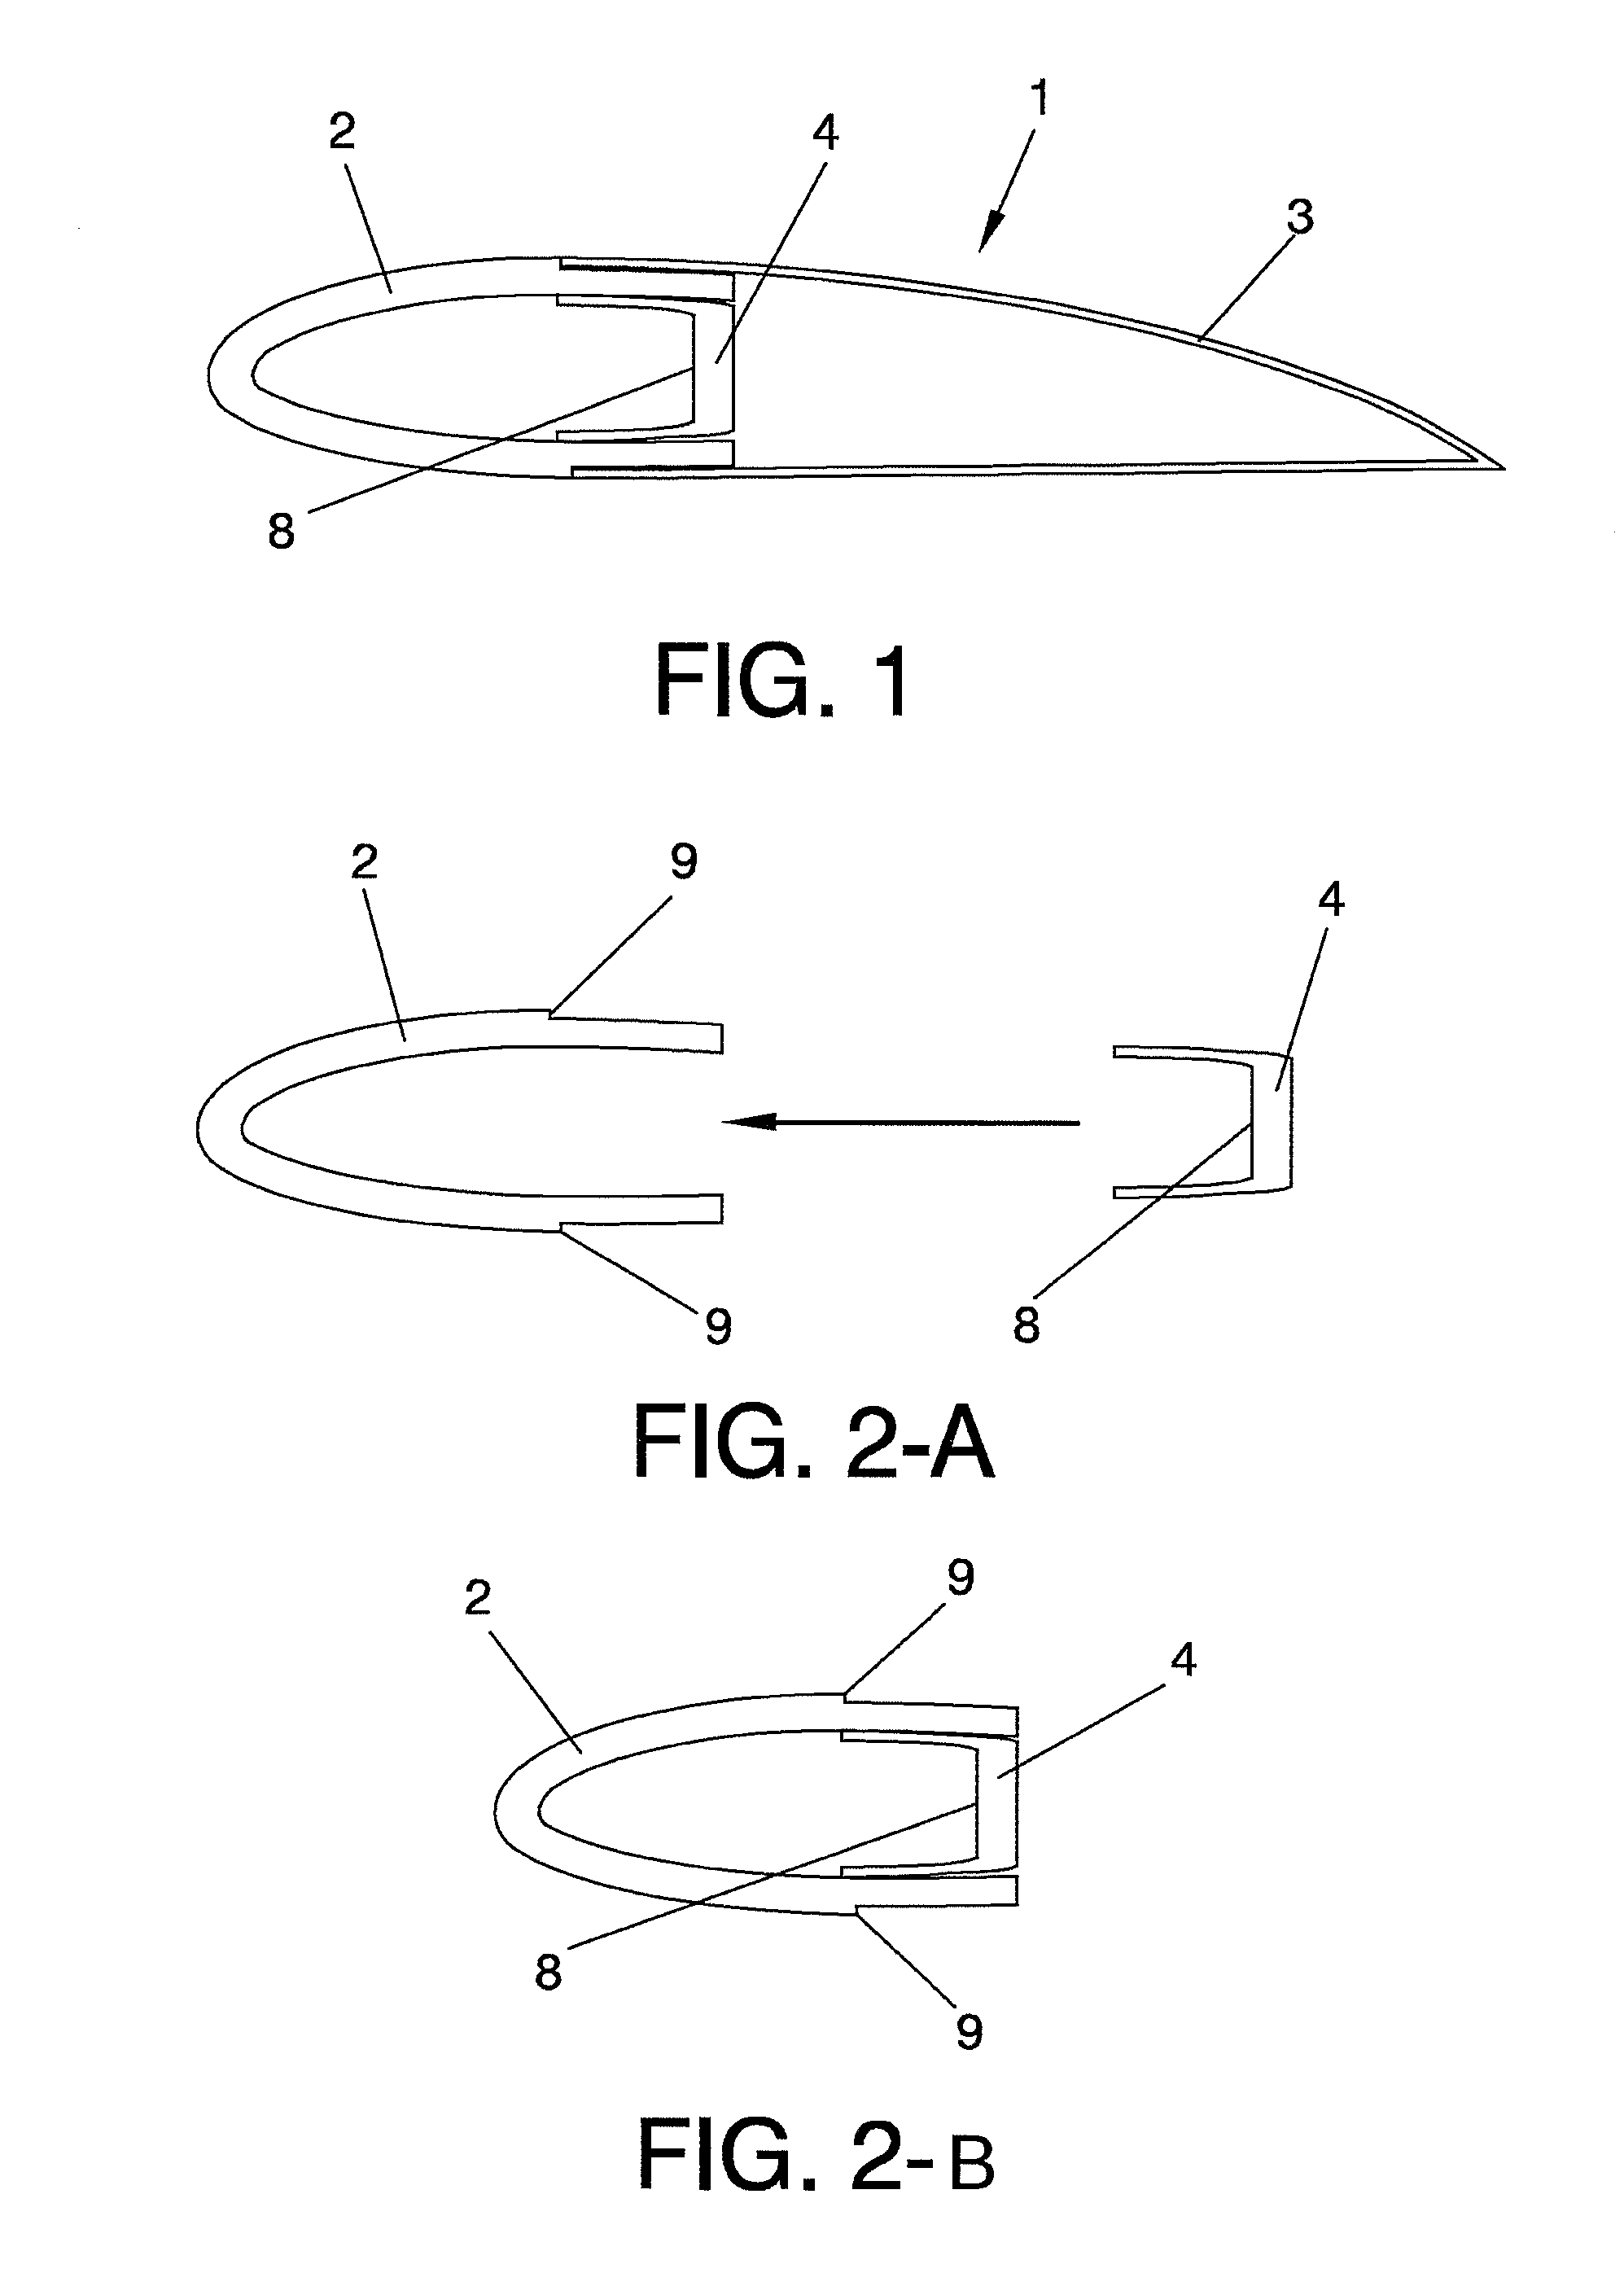 Method for manufacturing wind turbine blades, blades for propellors, wings, or similar structures, and structure in the form of a blade obtained by means of this procedure